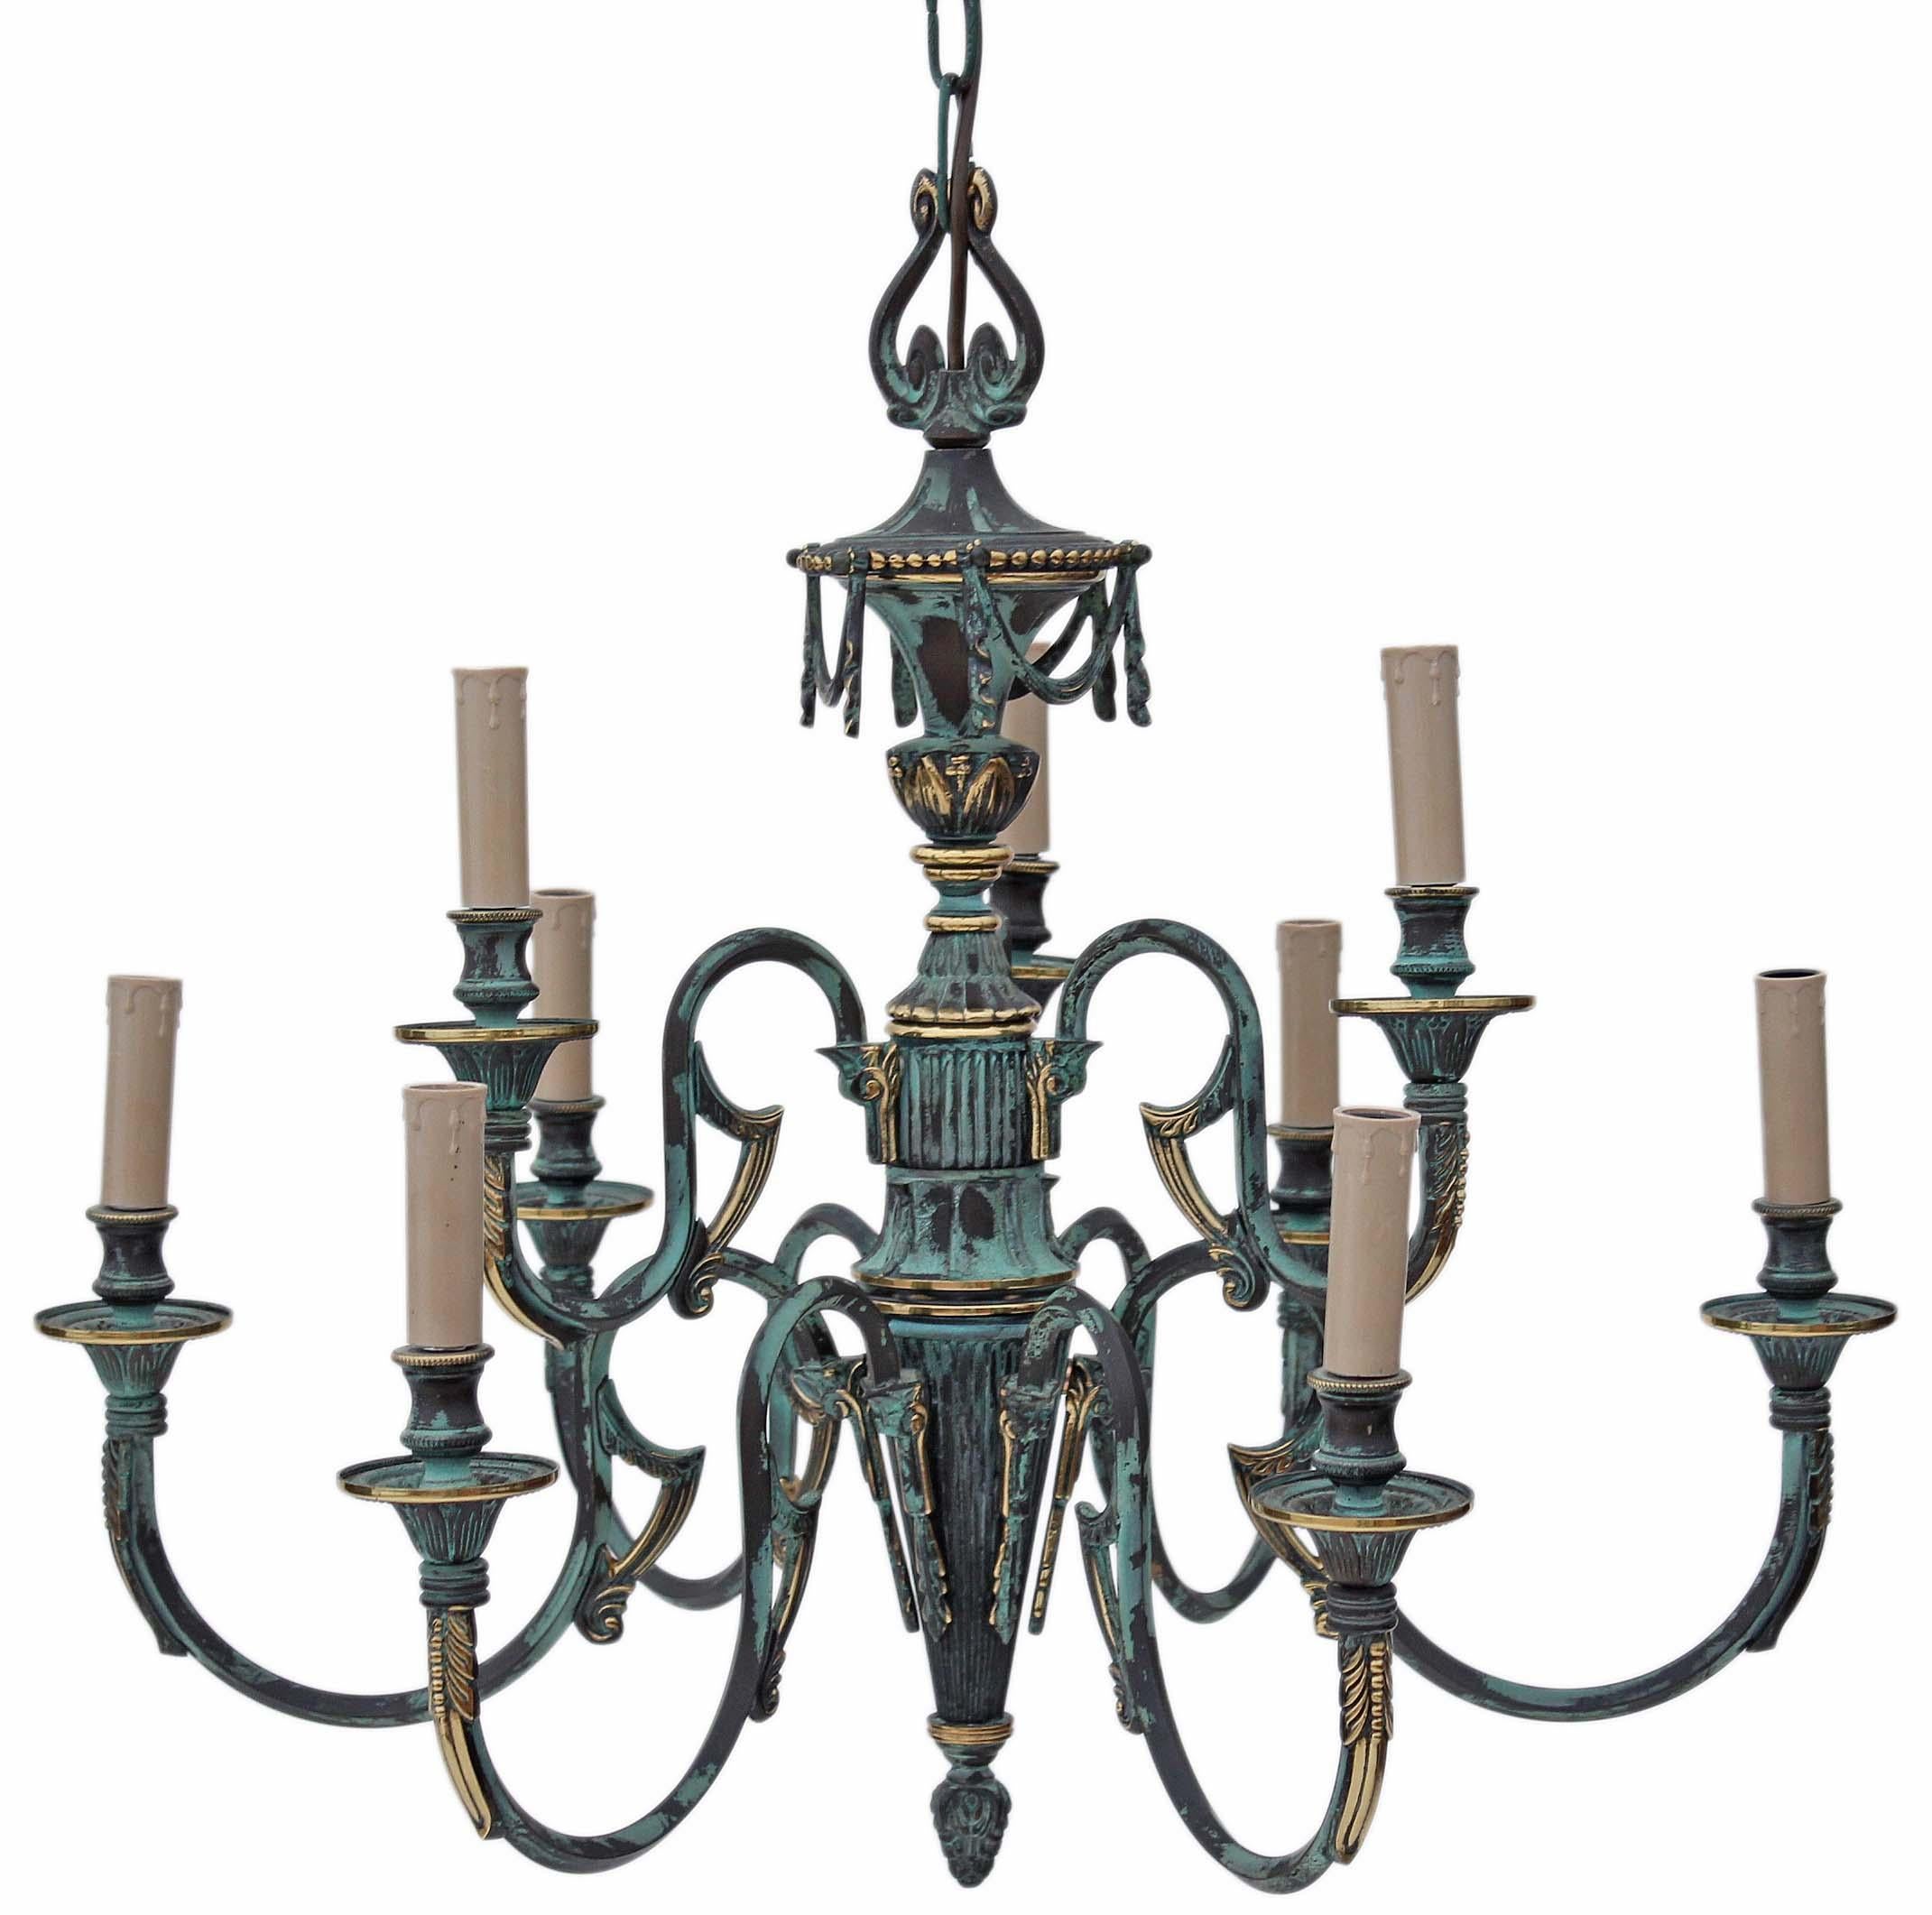 Antique large heavy Gothic 9-lamp brass bronze chandelier.

This striking chandelier, approximately 20 years old, showcases a heavily tarnished brass appearance, possibly featuring other metals, with vert de gris aging.

Sure to command attention